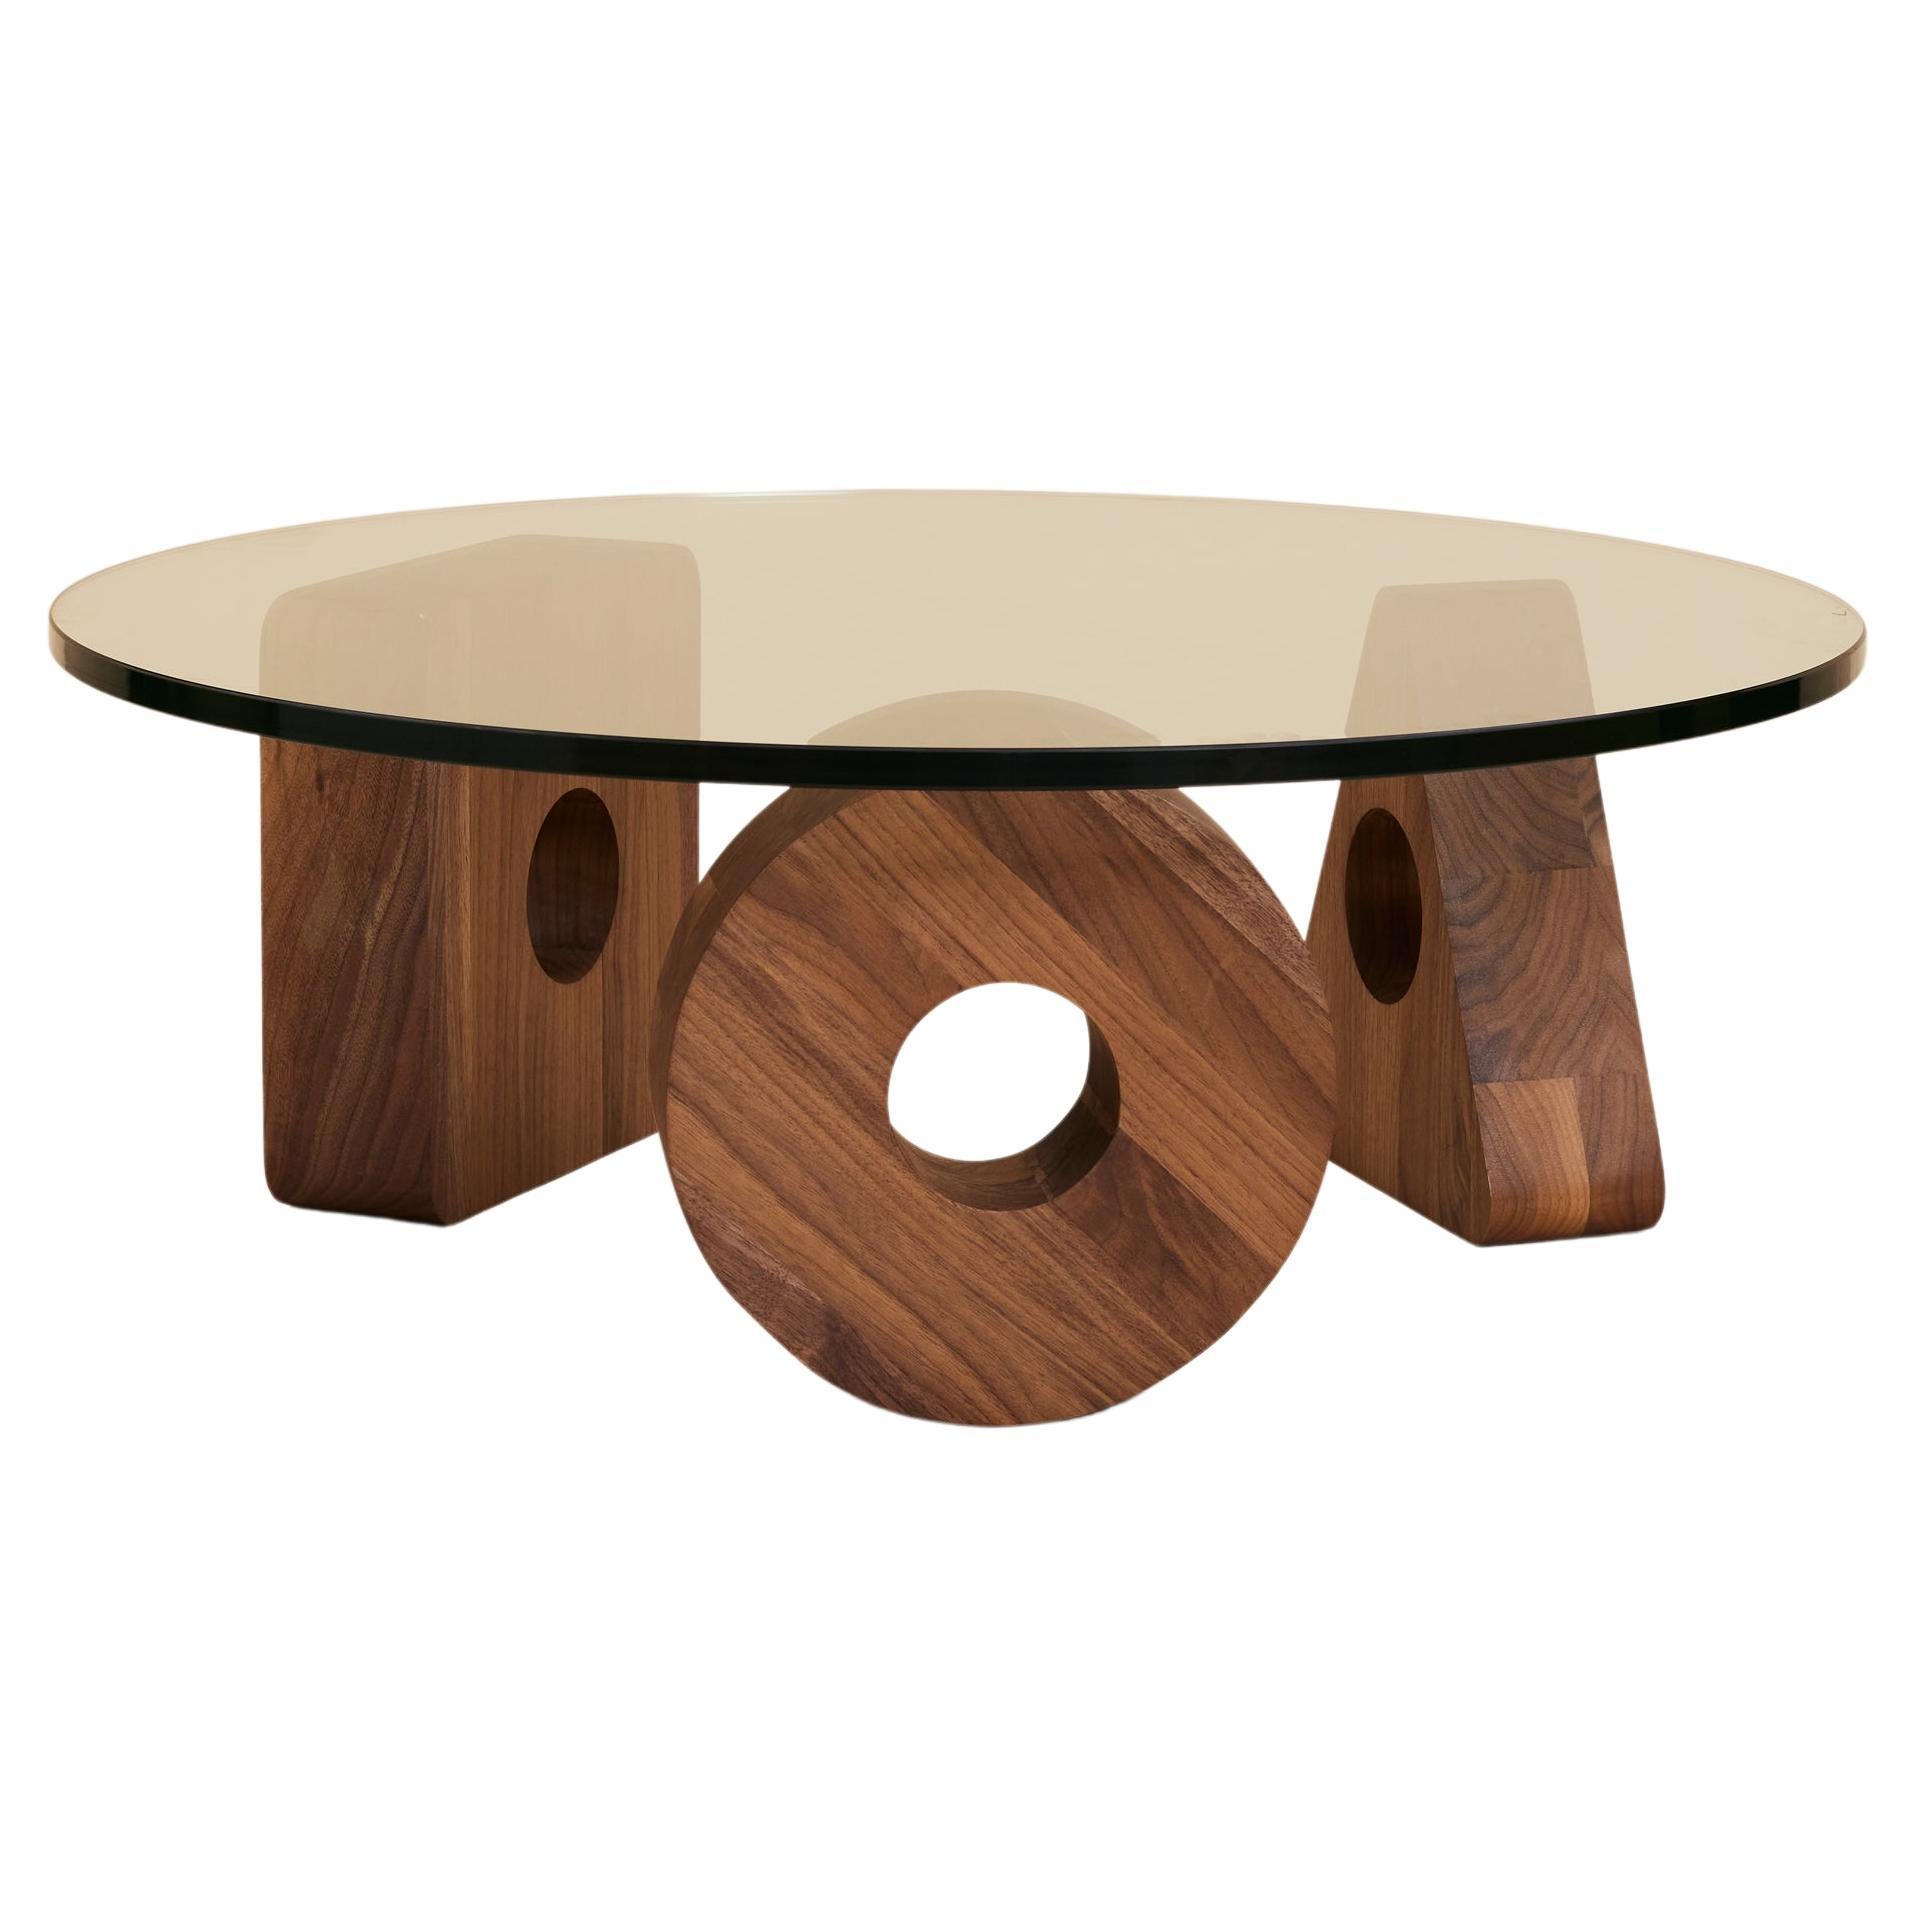 The Cosmo Coffee Table by Arjé